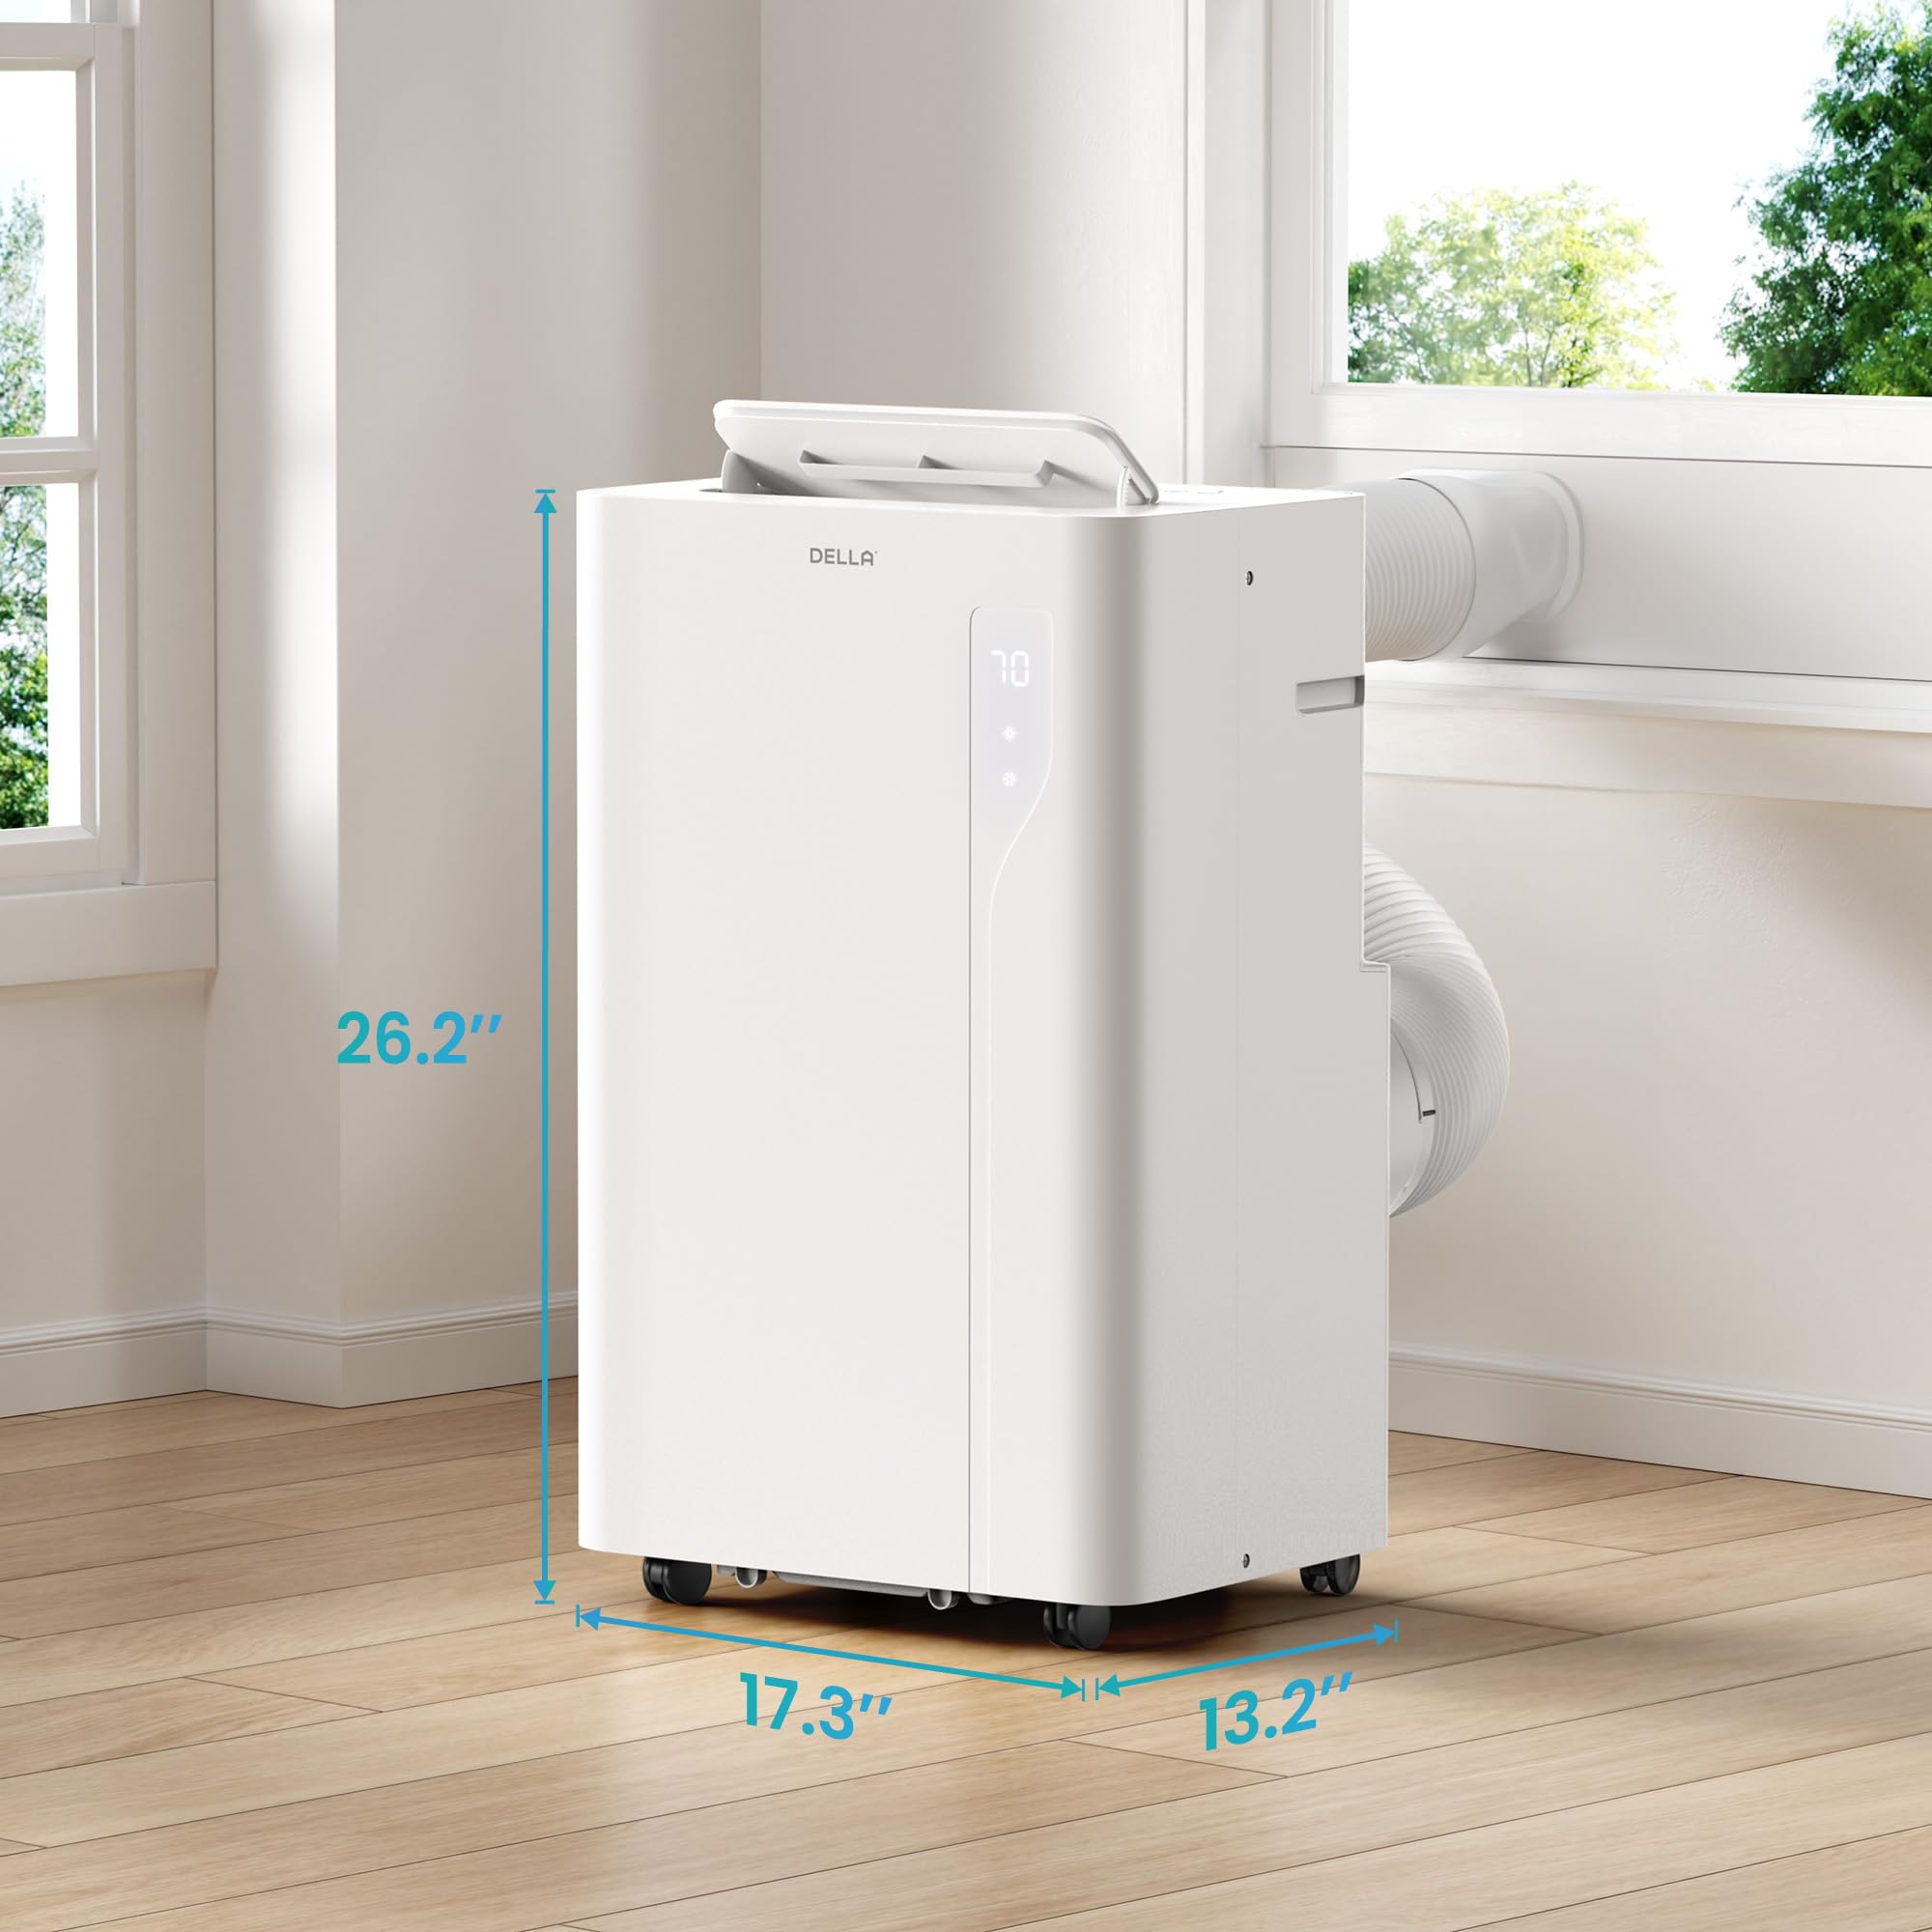 DELLA 14,000 BTU Portable Air Conditioner with heat pump, Work with Alexa, Geo Fencing, WiFi Cools Up To 650 Sq.Ft, Electric Auto Swing,3 Speeds Fan, Dehumidifier with Remote Control & Window Kit